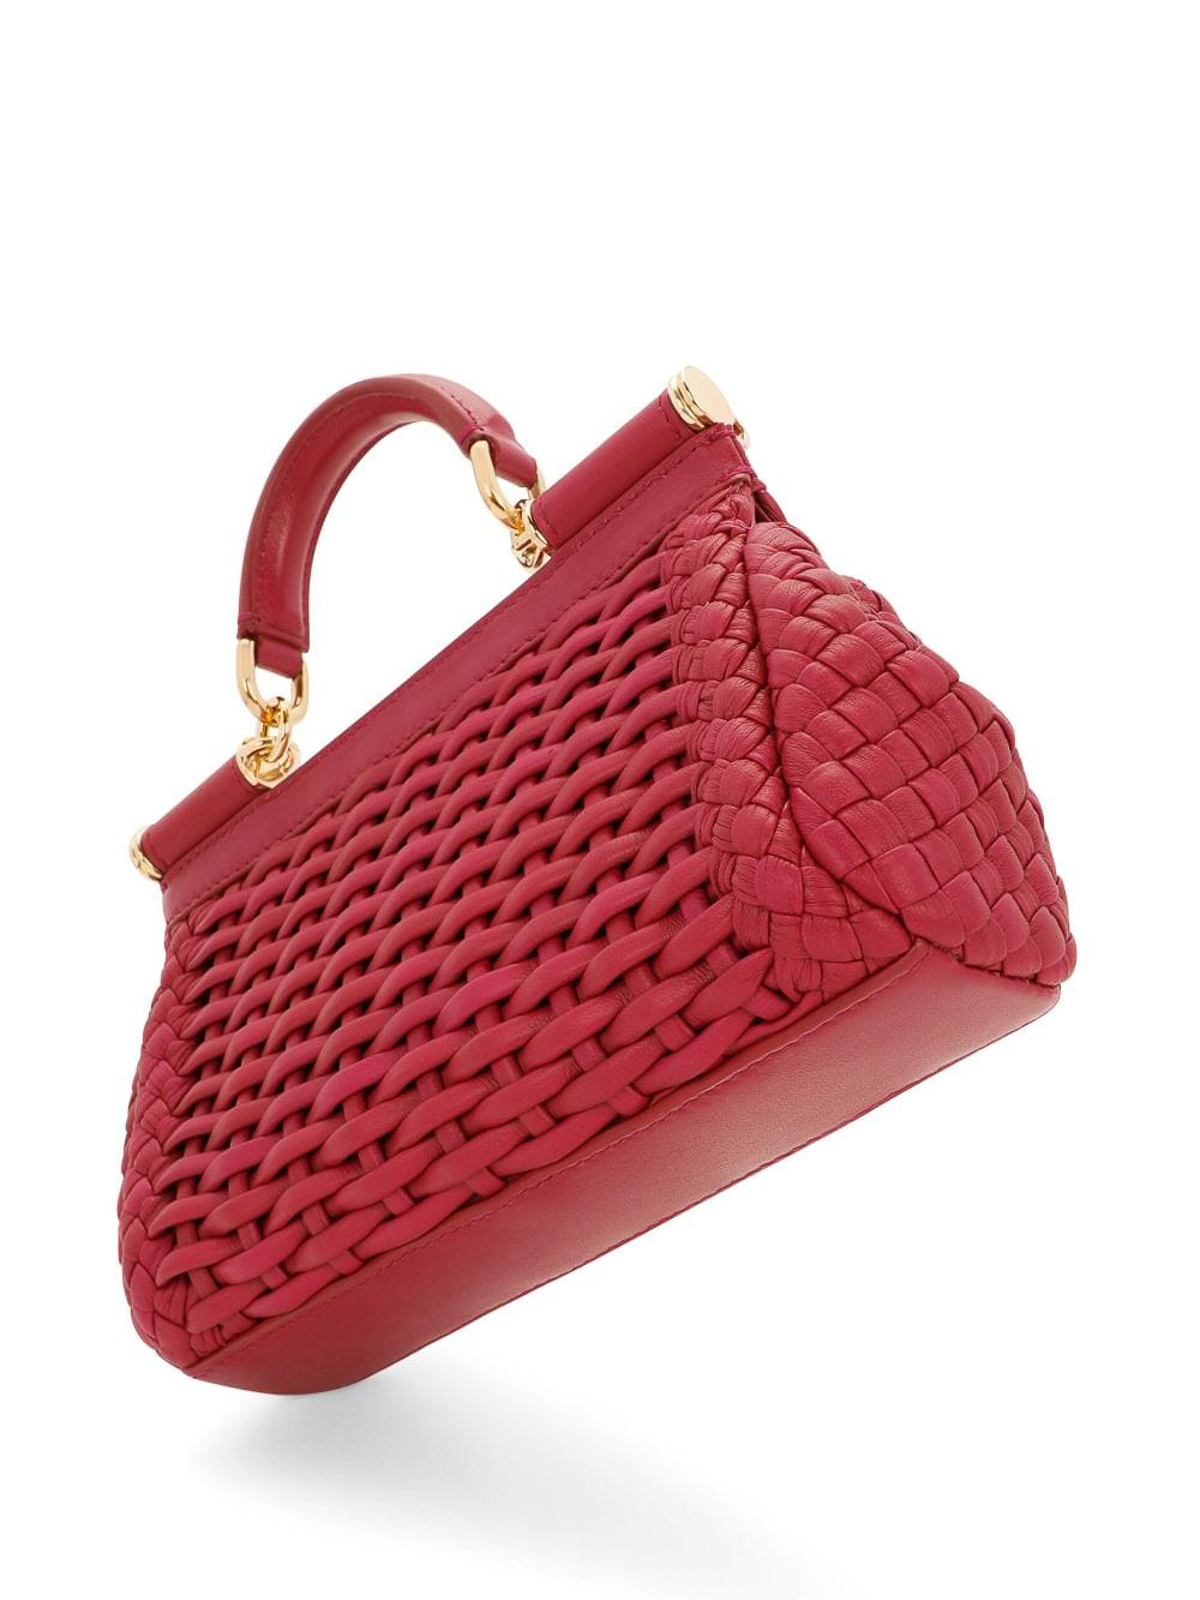 Shop Dolce & Gabbana Sicily Small Leather Handbag In Red